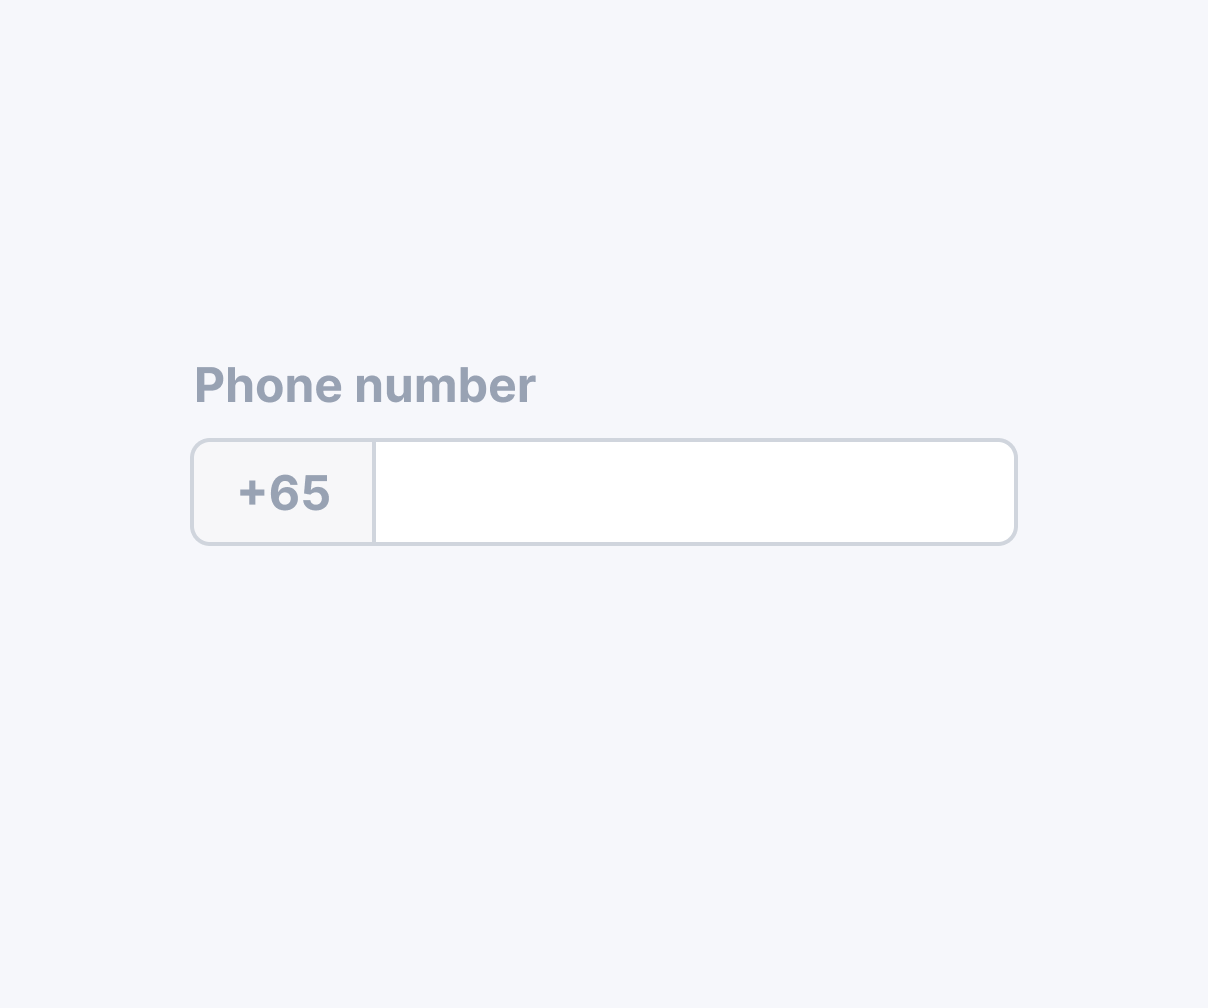 Phone Number image